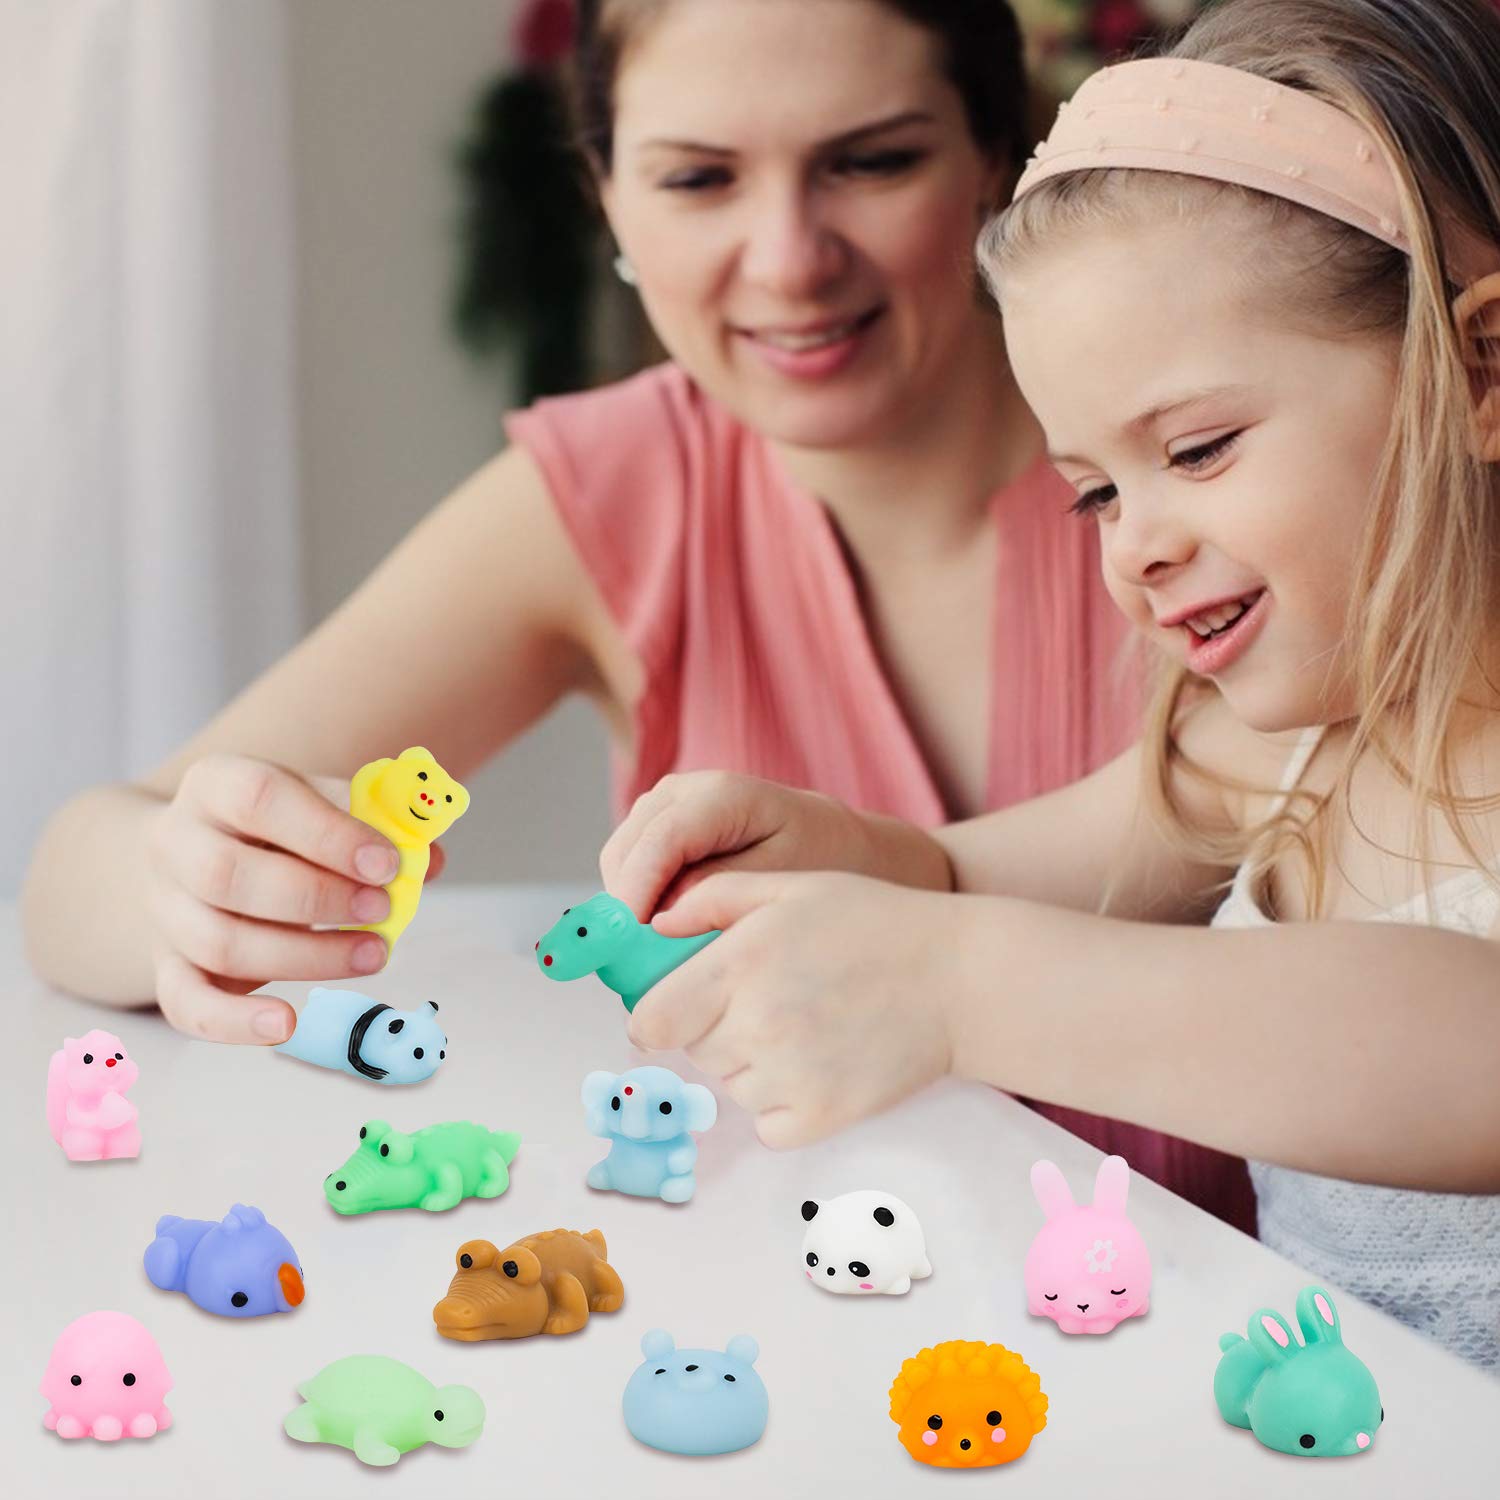 YIHONG 72 Pcs Kawaii Squishies, Mochi Squishy Toys for Kids Party Favors, Mini Stress Relief Toys for Halloween Christmas Easter Party Favors, Birthday Gifts, Classroom Prizes, Goodie Bag